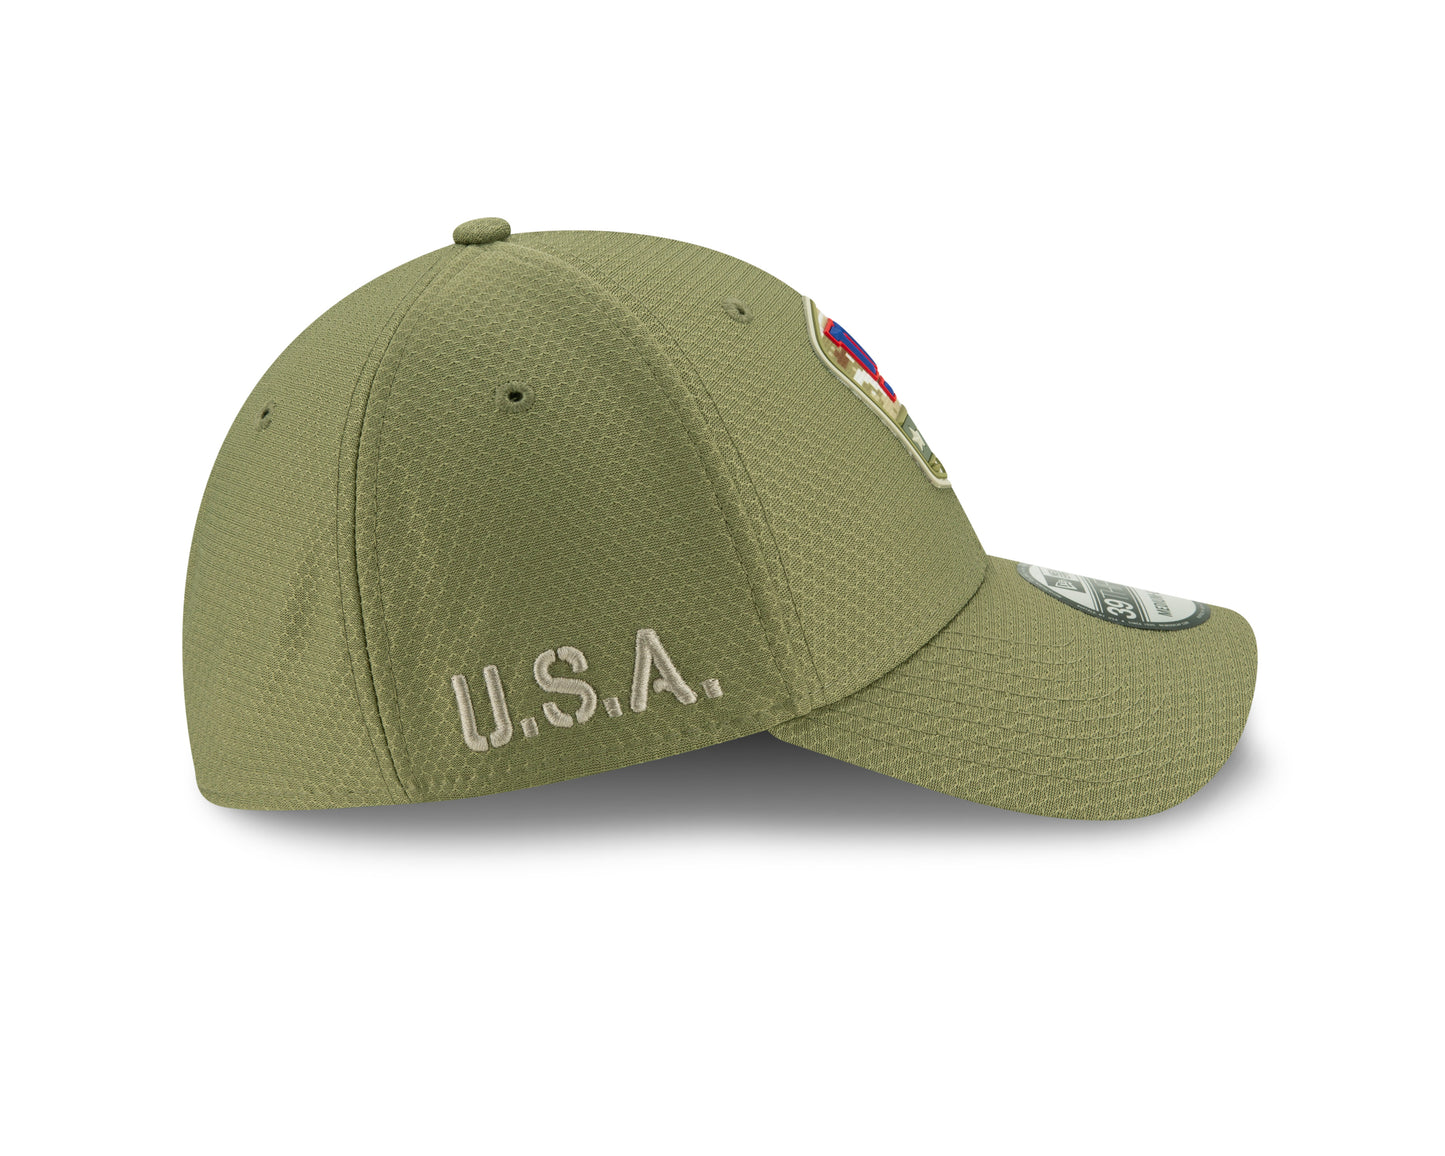 New York Giants New Era 2019 Salute to Service Sideline 39THIRTY Hat Olive